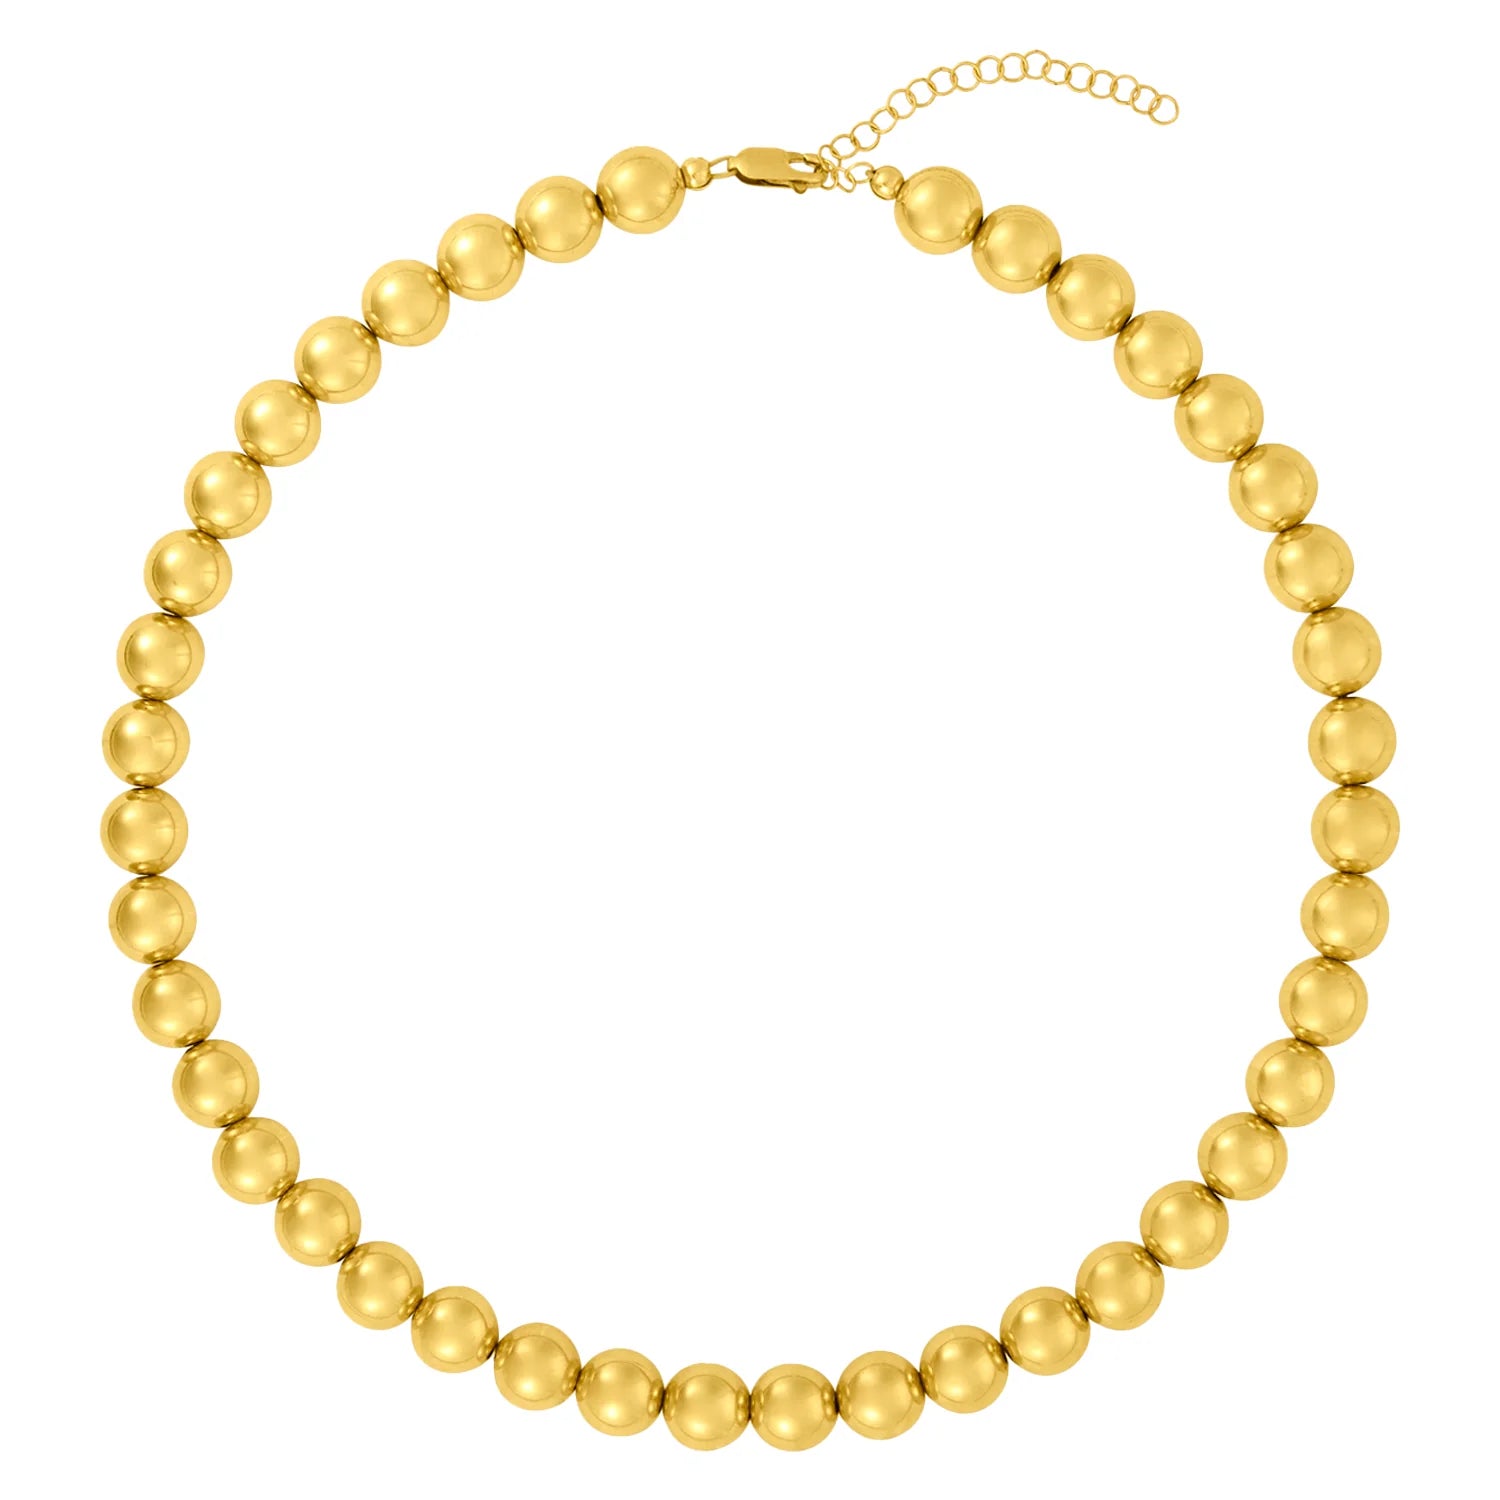 10MM SIGNATURE GOLD BEADED NECKLACE